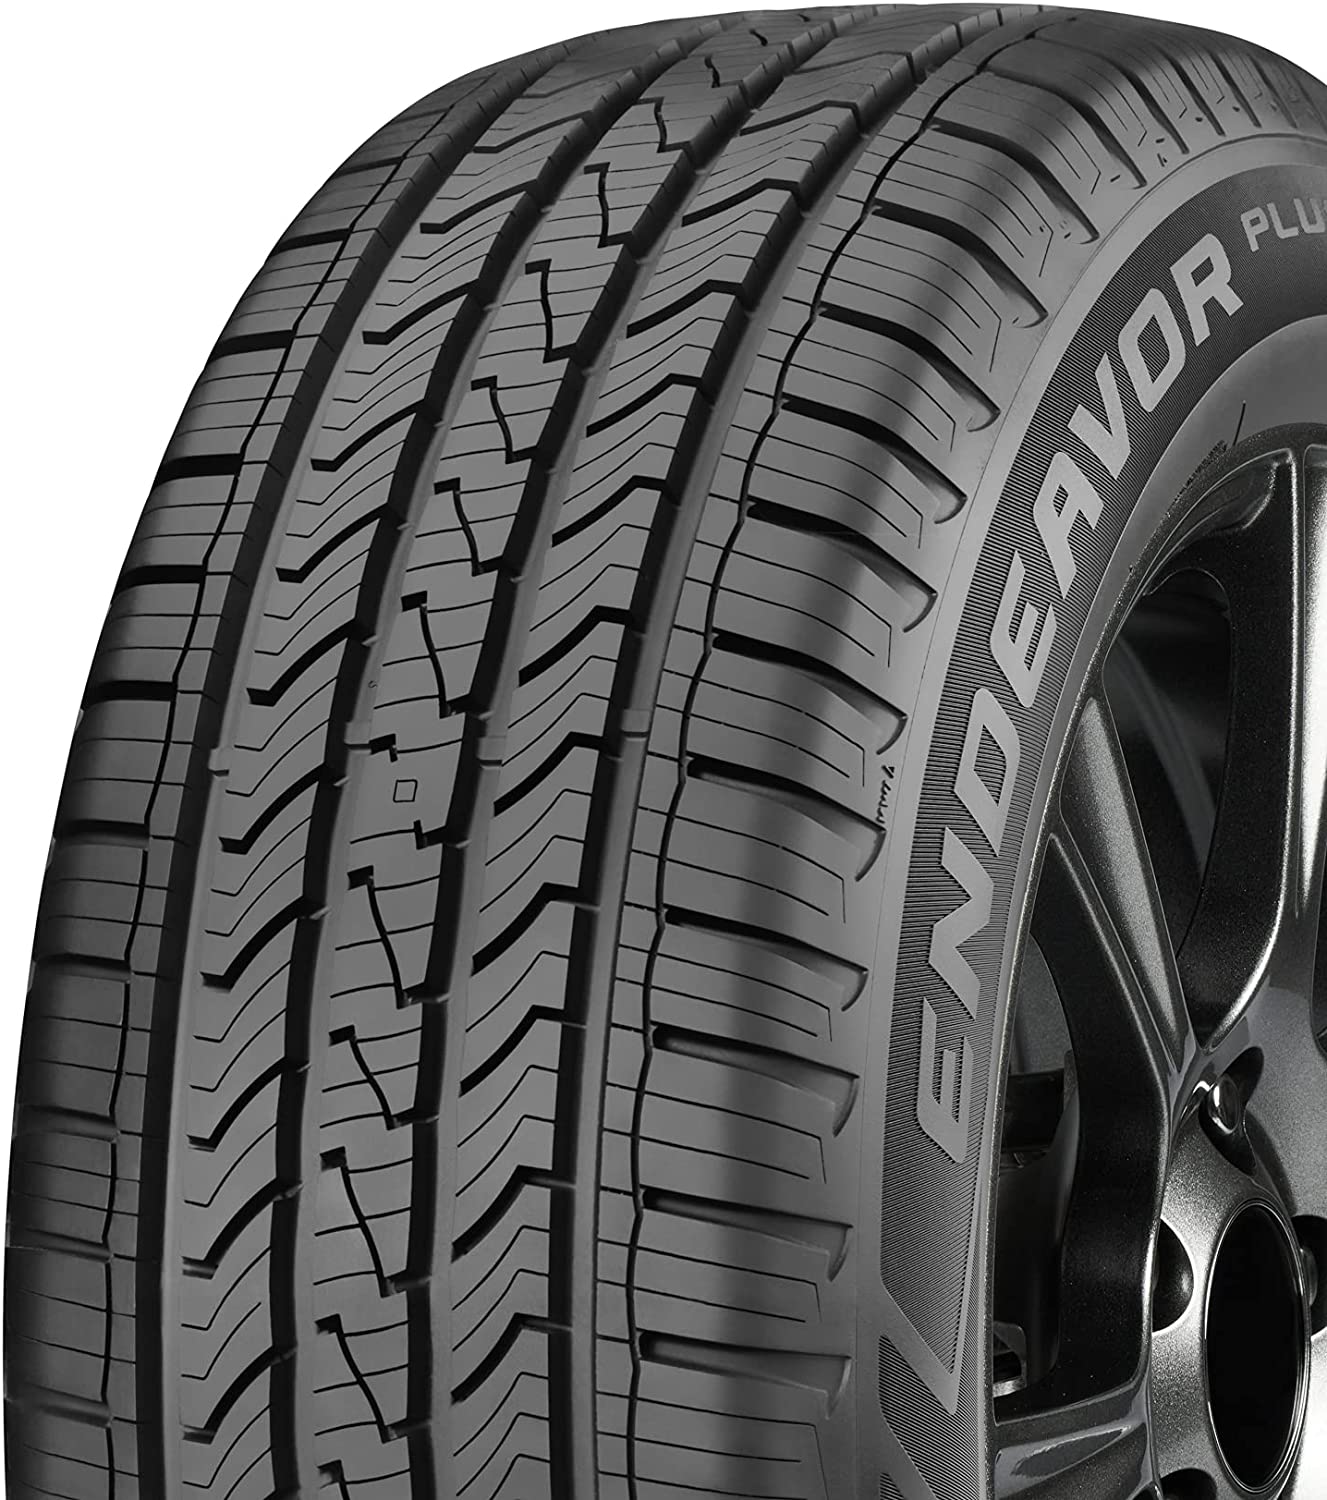 Looking For 265 65 17 Endeavor Plus Cooper Tires 